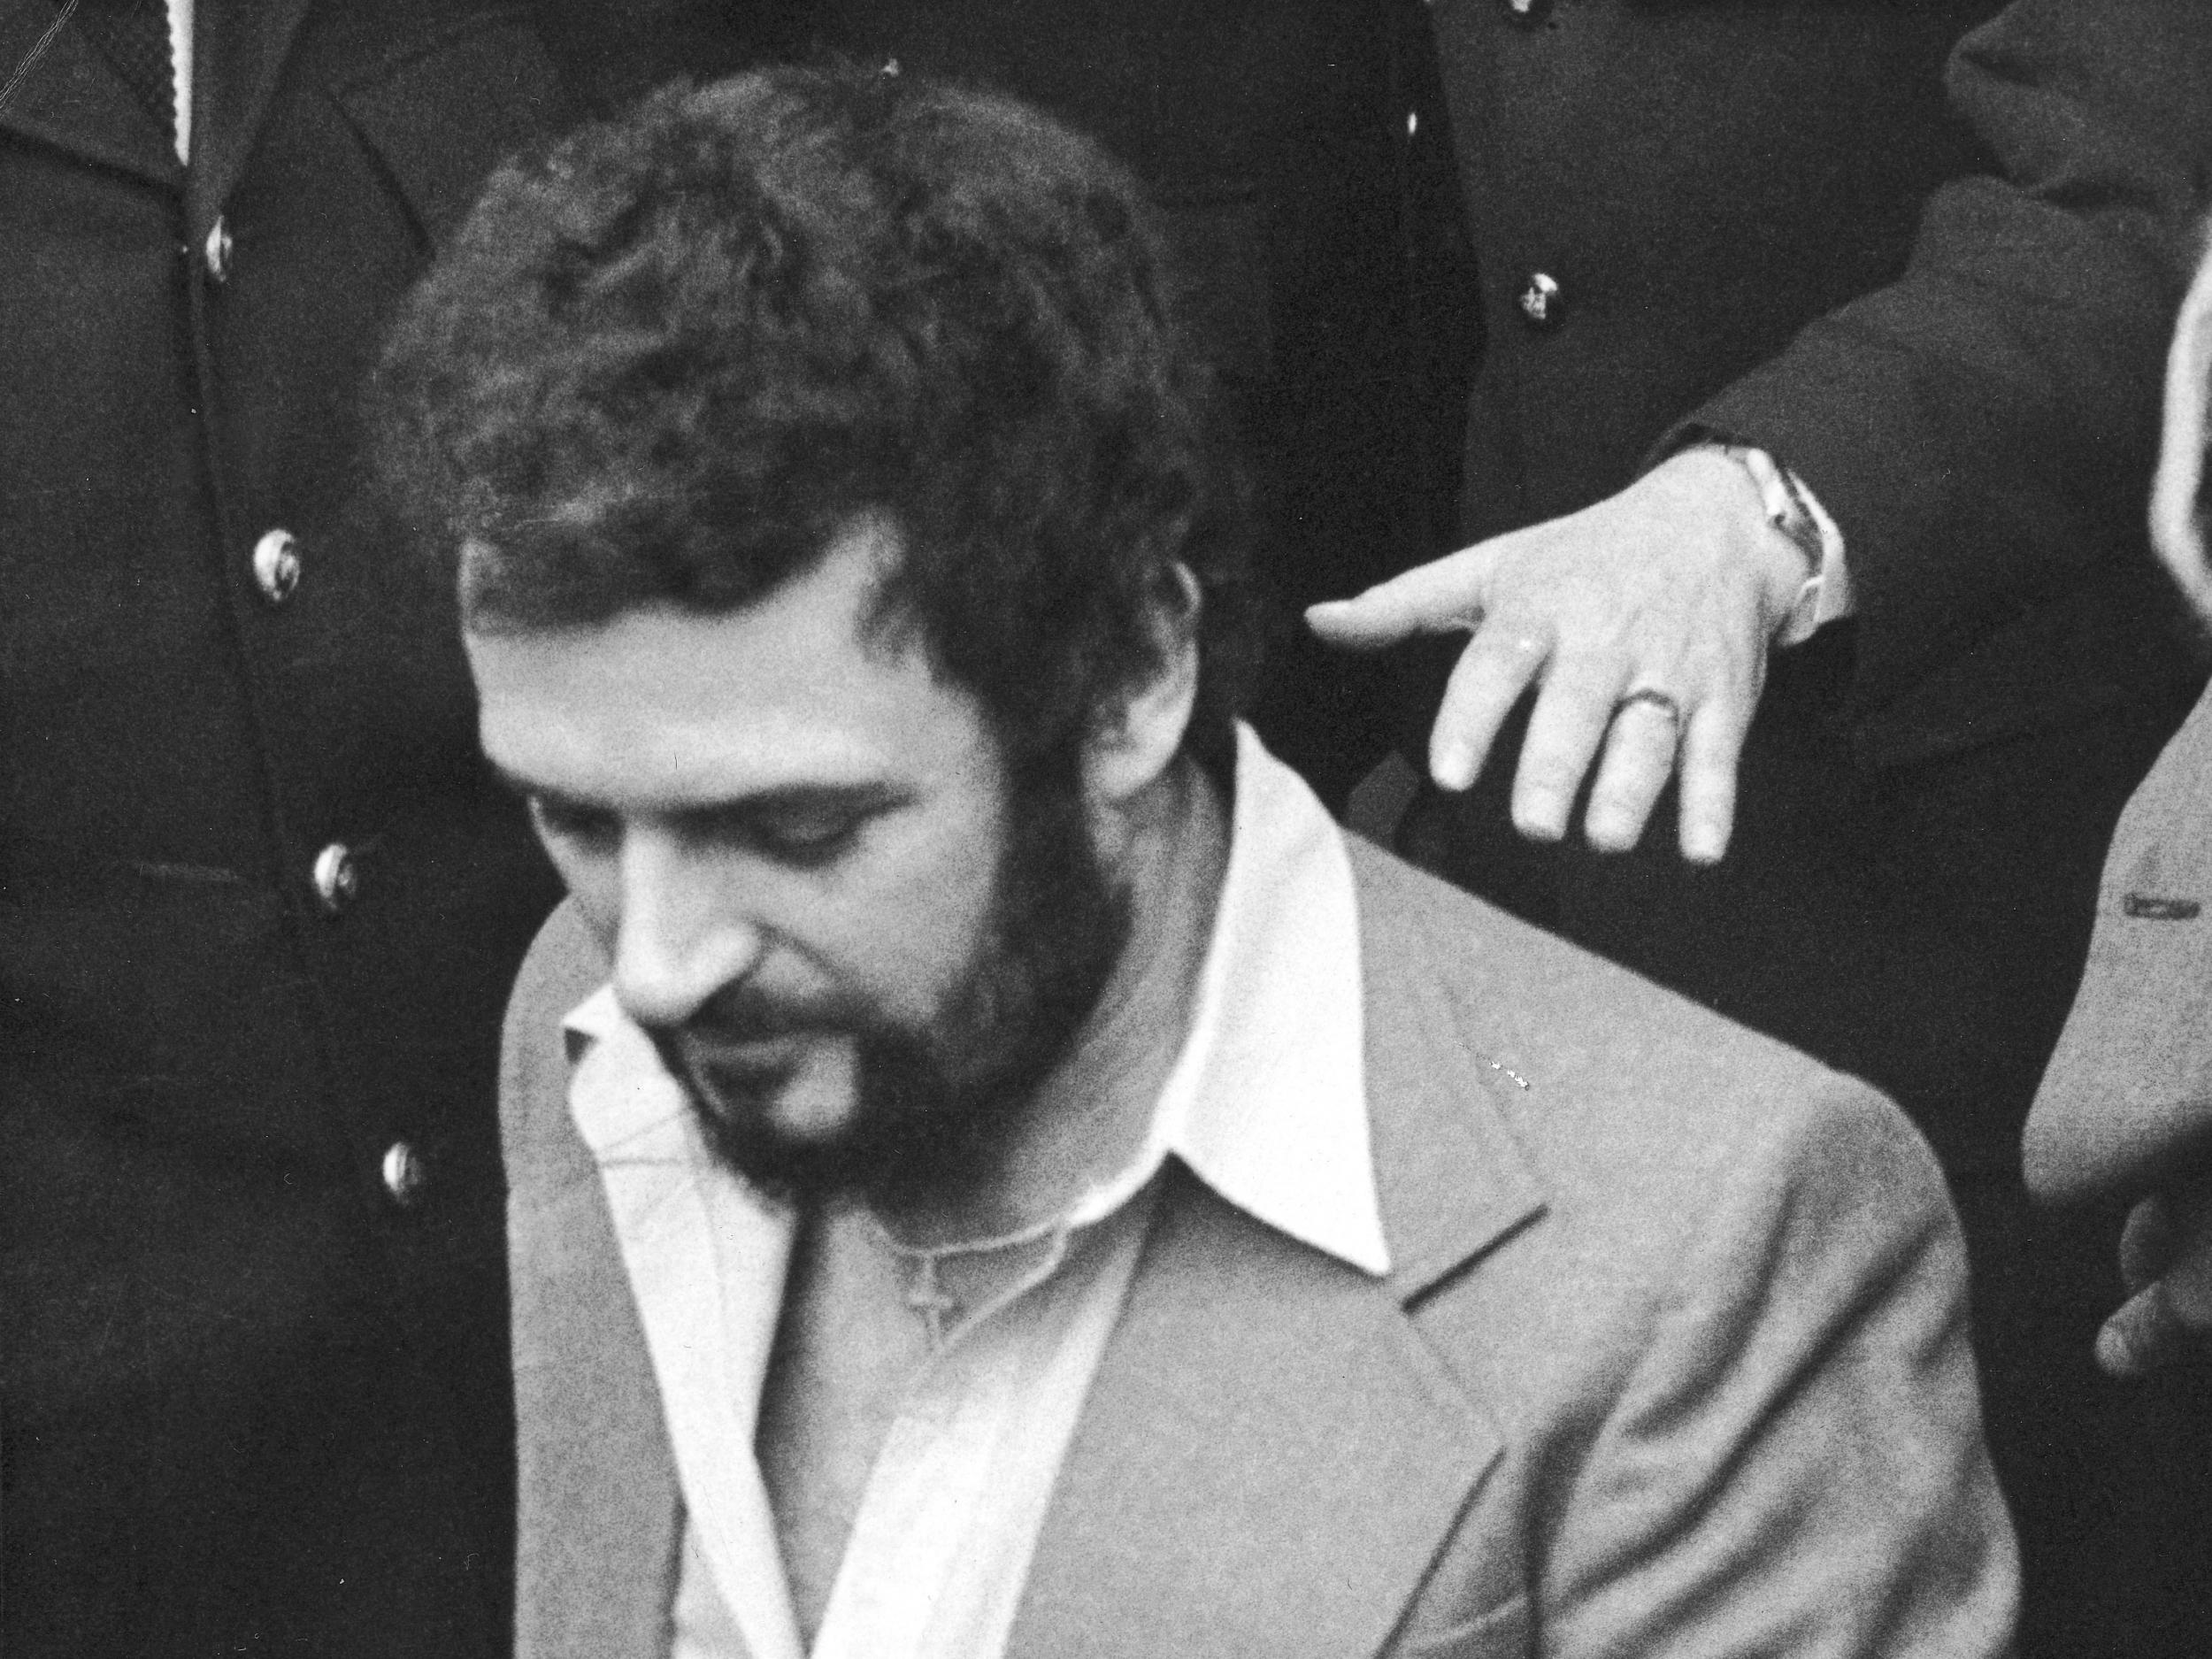 Police were thrown off the chase for the Yorkshire Ripper, Peter Sutcliffe, because of hoax tapes from another man